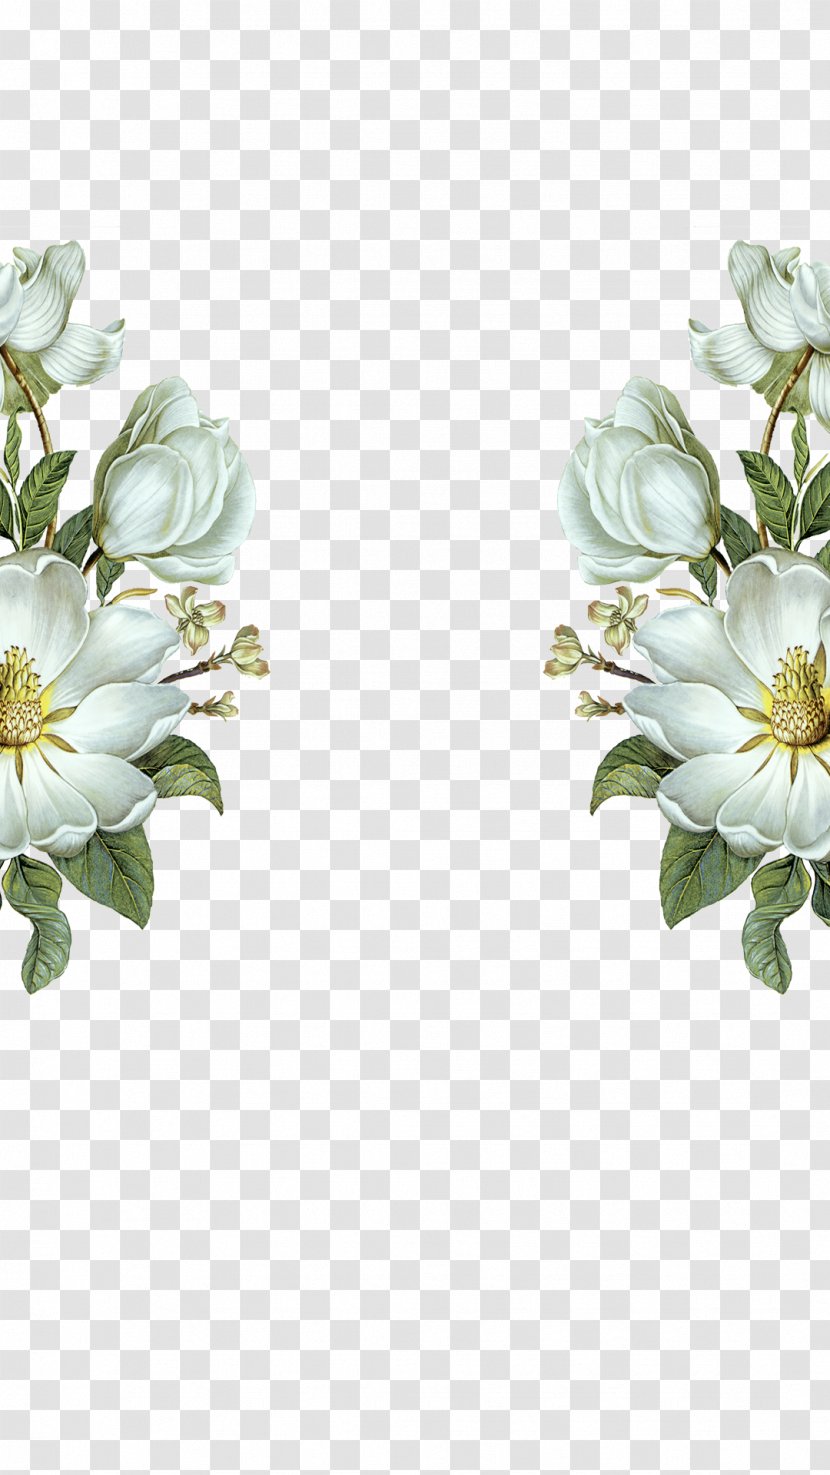 Pure And Fresh Flowers - Poster - Pattern Transparent PNG